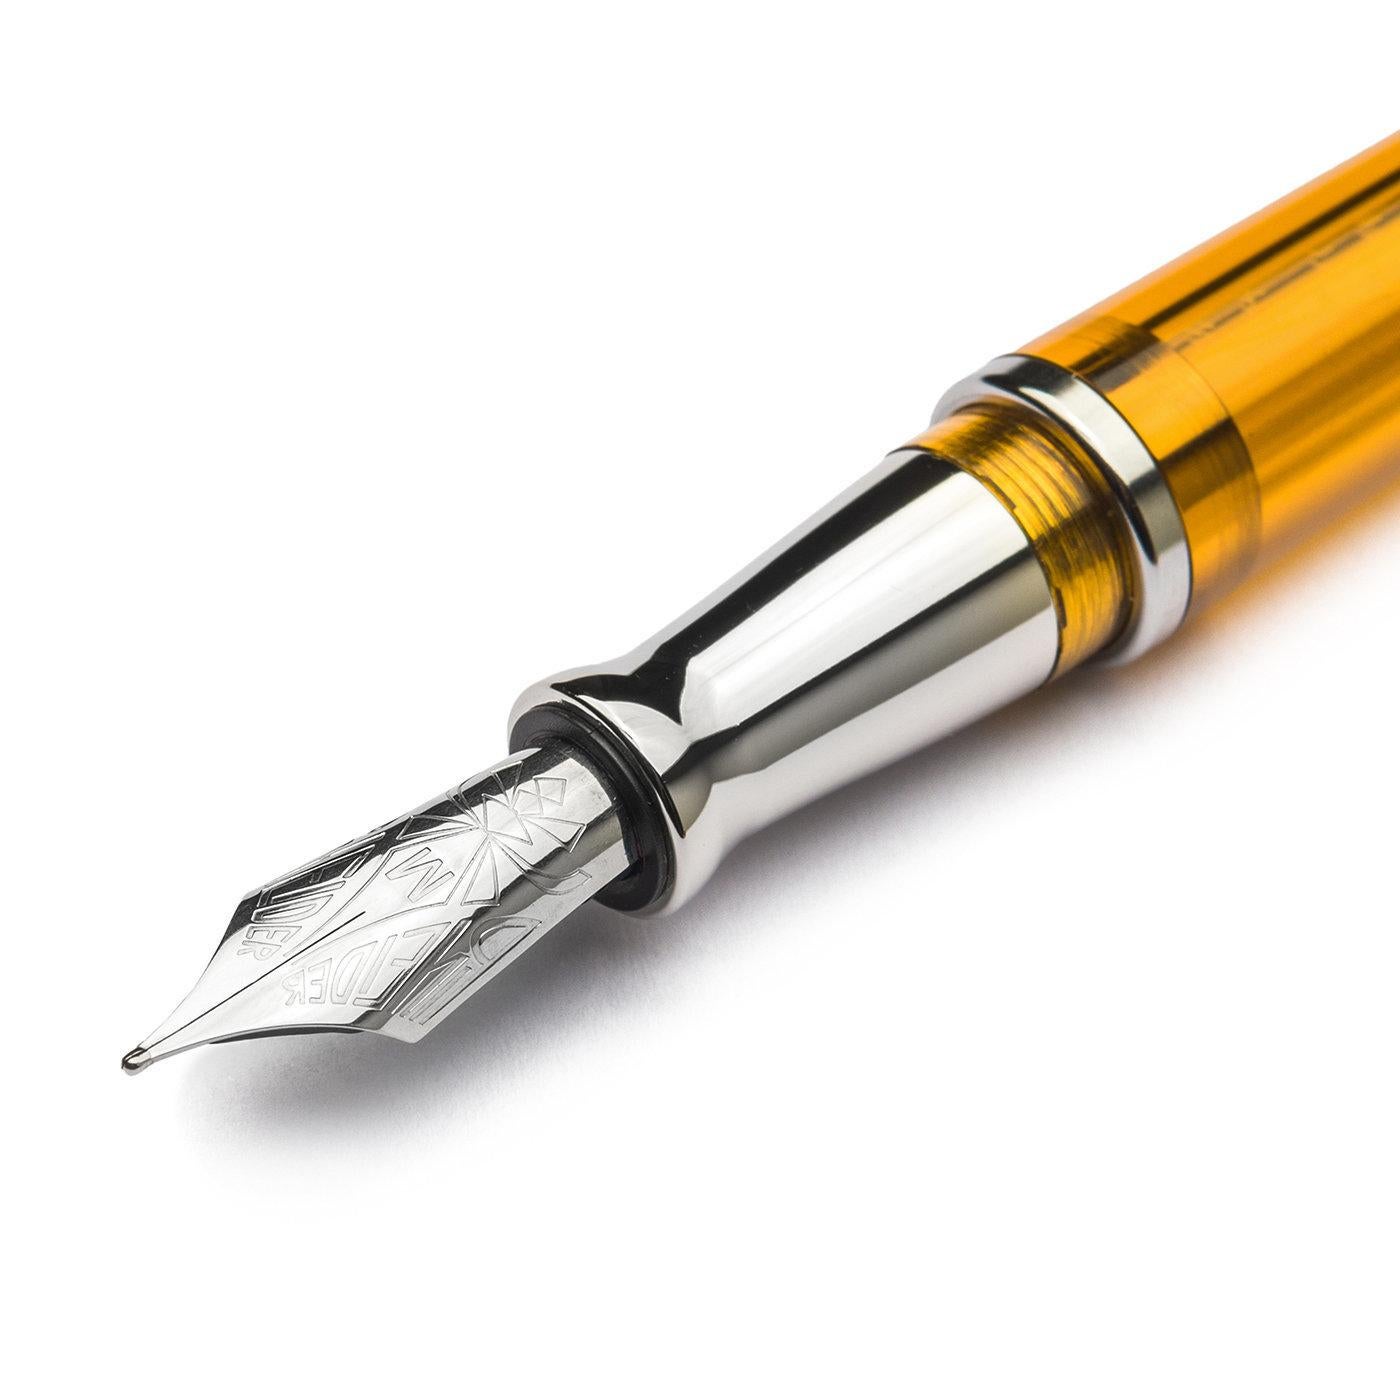 Fashioned of transparent, amber-hued UltraResin - an incredibly shock-resistant and pure material developed by Pineider - this fountain pen with soft-close cap lock was designed to keep its ink level always monitored but in style. It boasts a